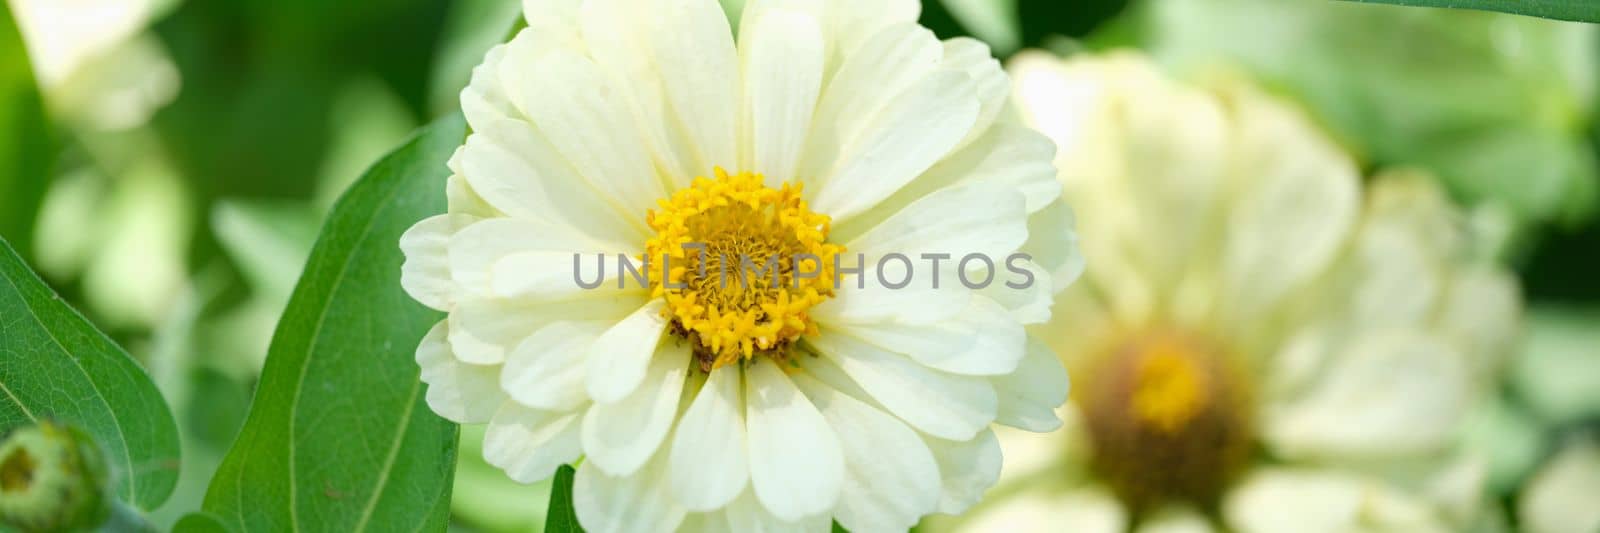 White flowers of beautiful chrysanthemums in nature in garden. Summer flowers in the garden concept